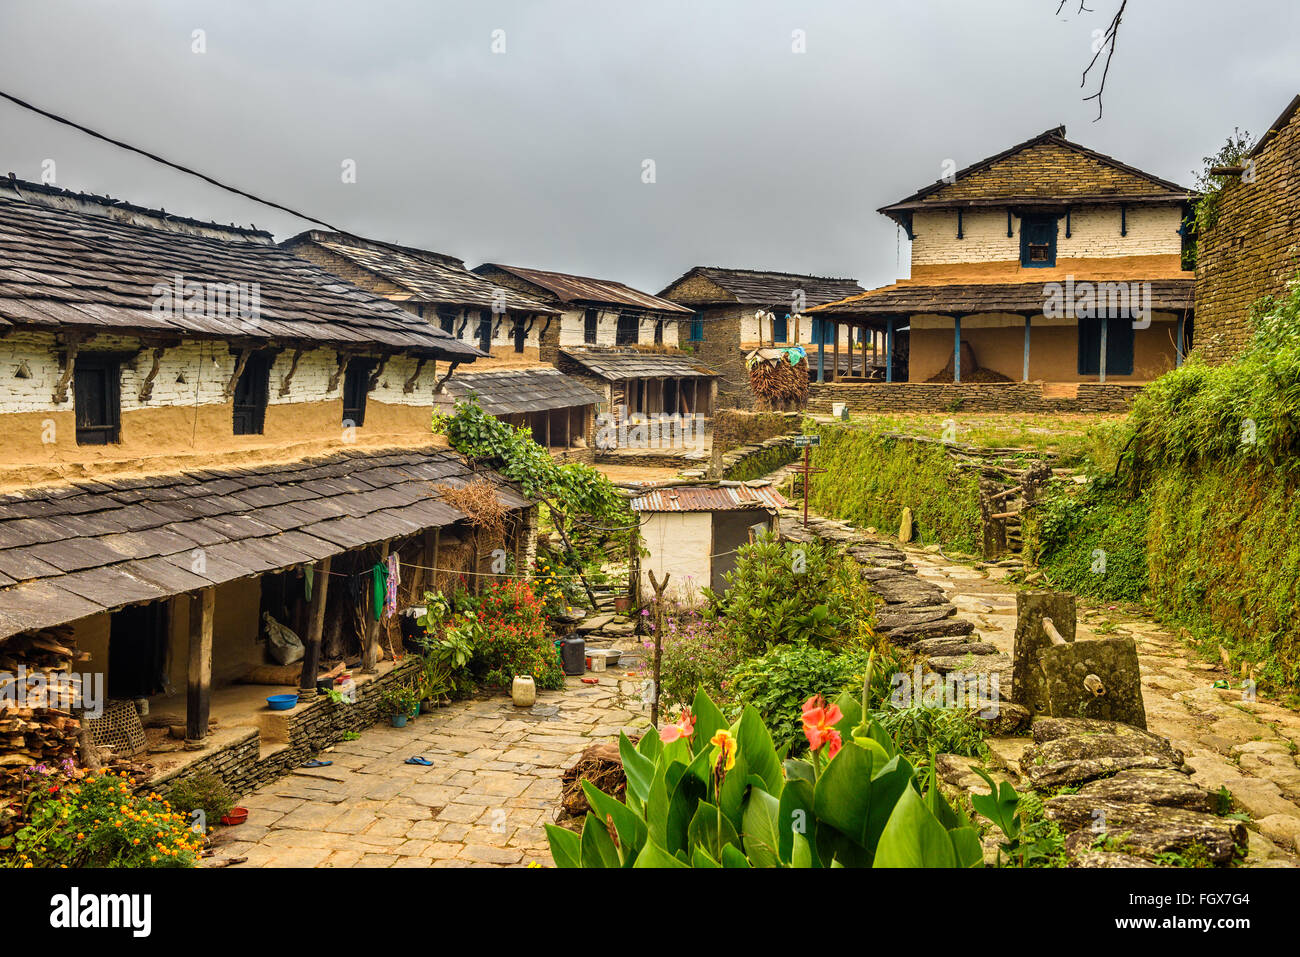 Village of Dhampus situated in the Himalayas mountains near Pokhara in Nepal Stock Photo